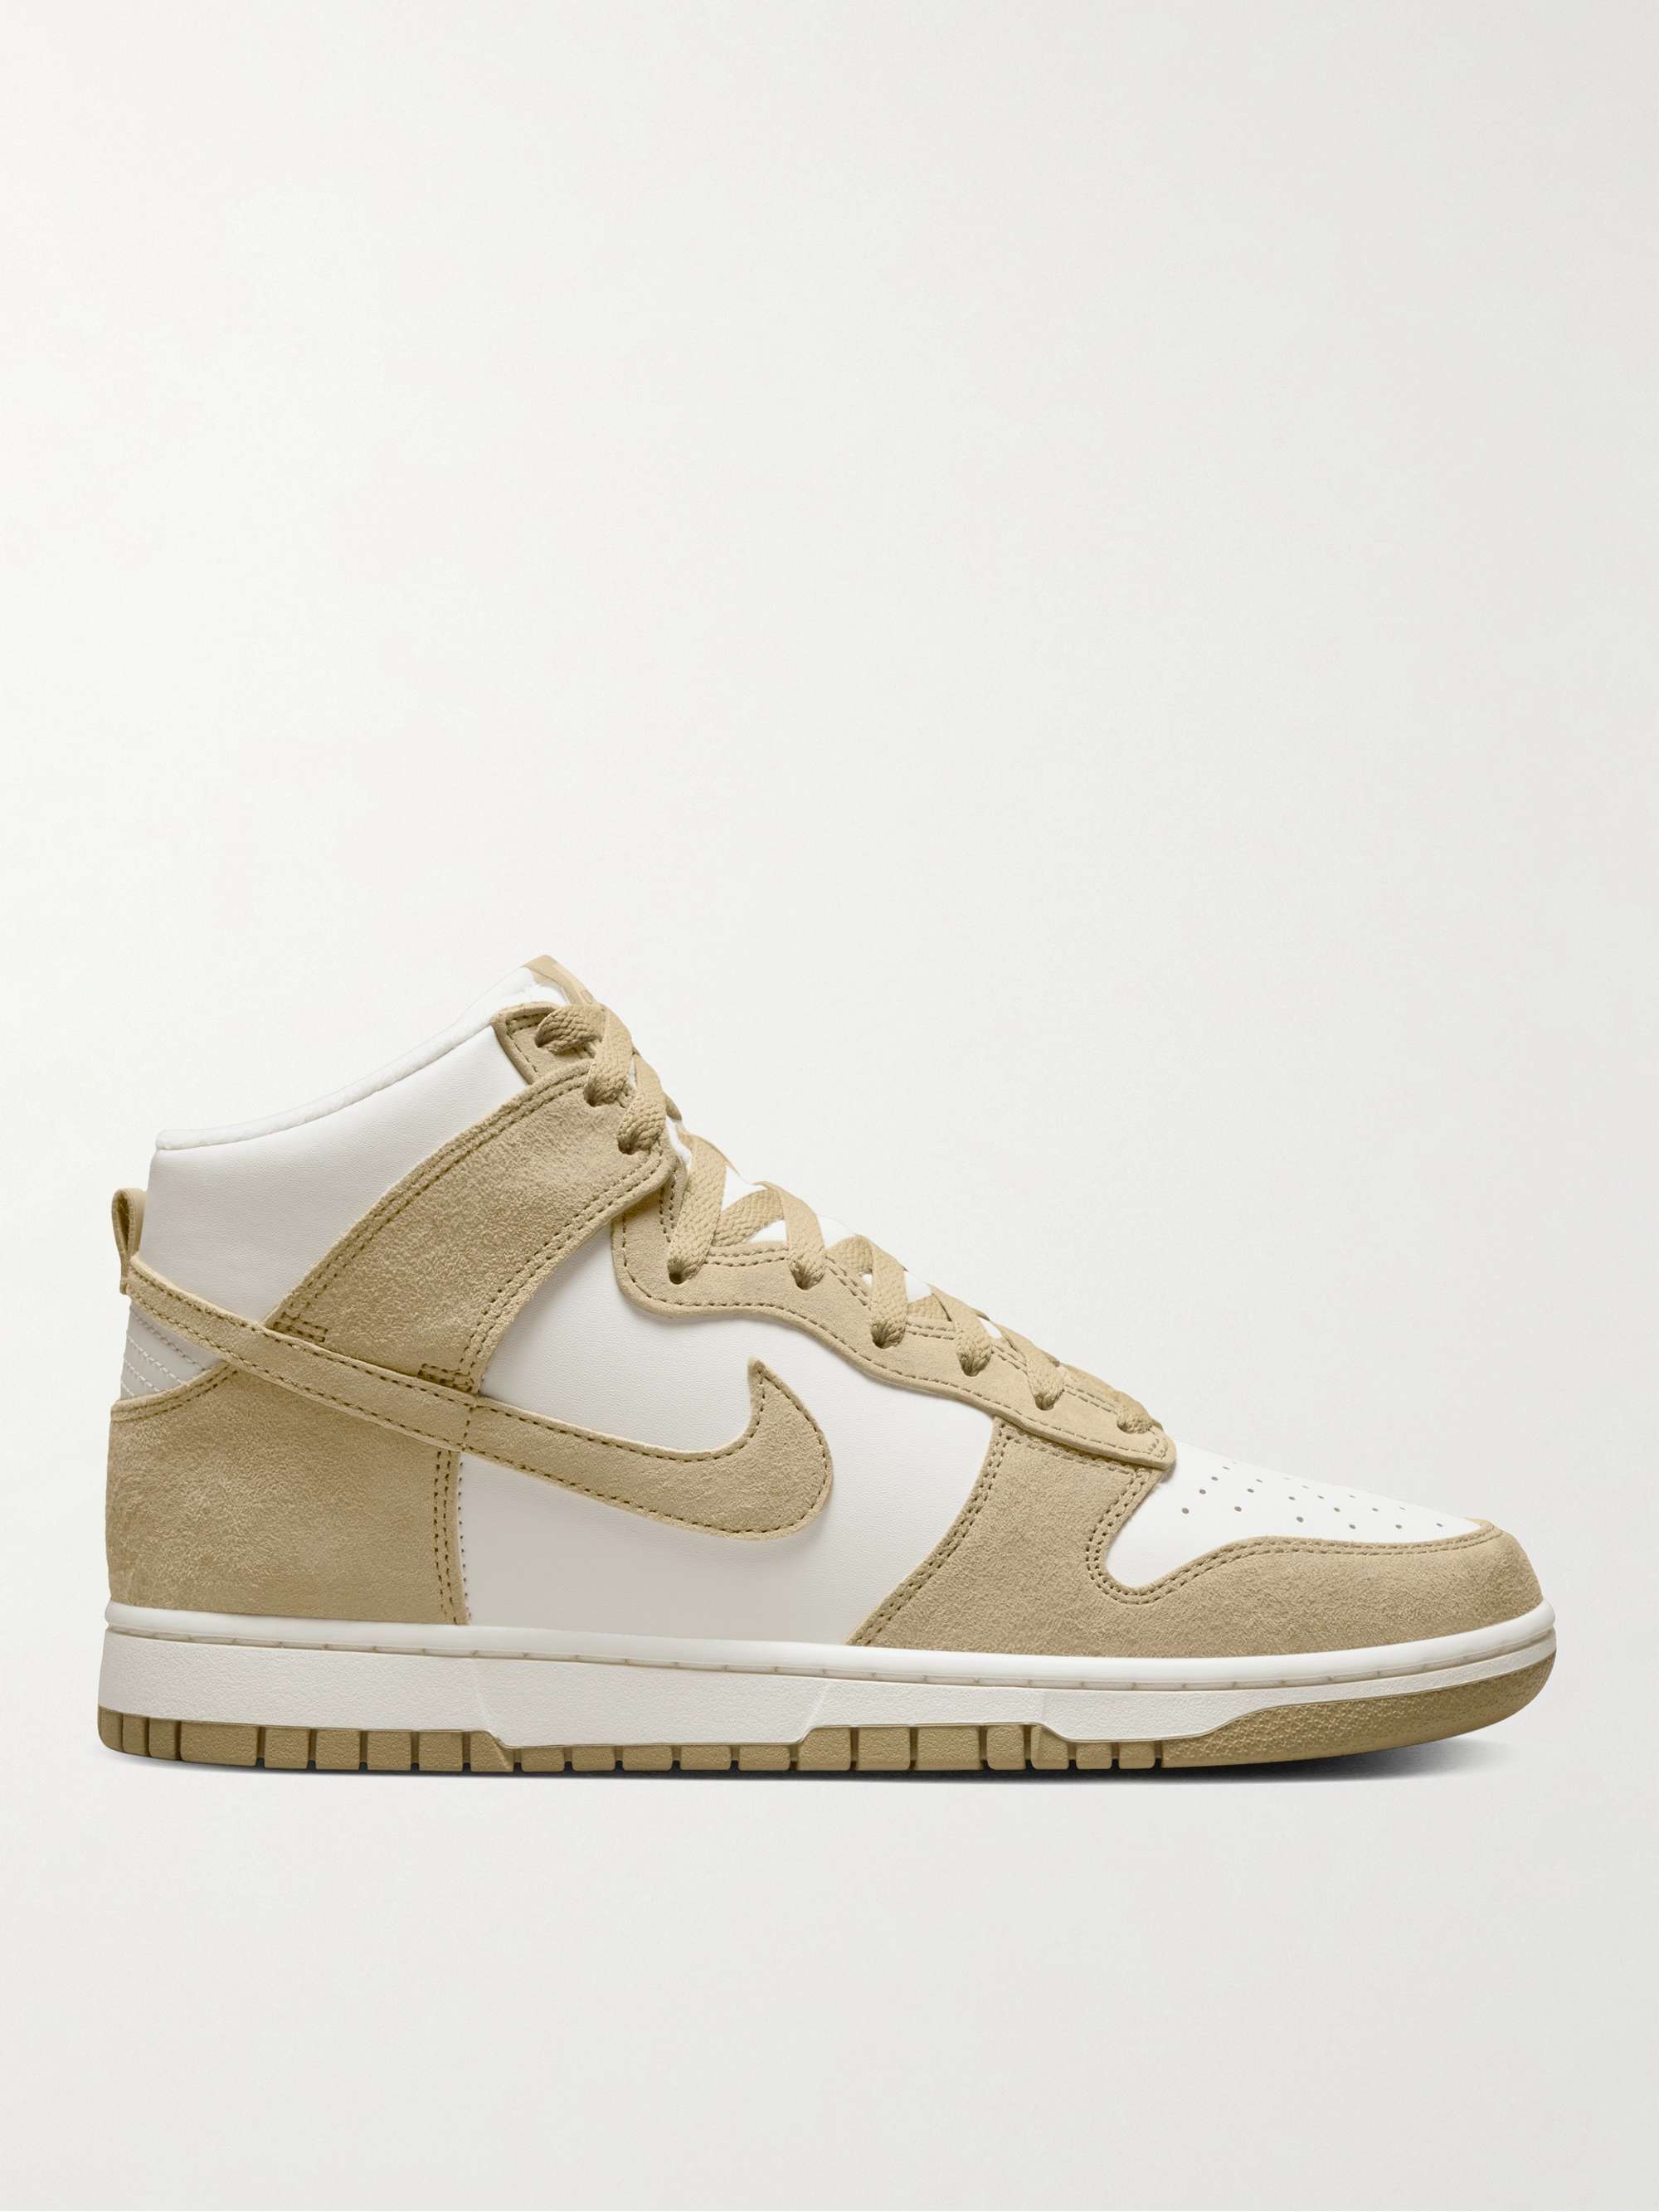 NIKE Dunk High Retro Leather and Suede Sneakers | MR PORTER